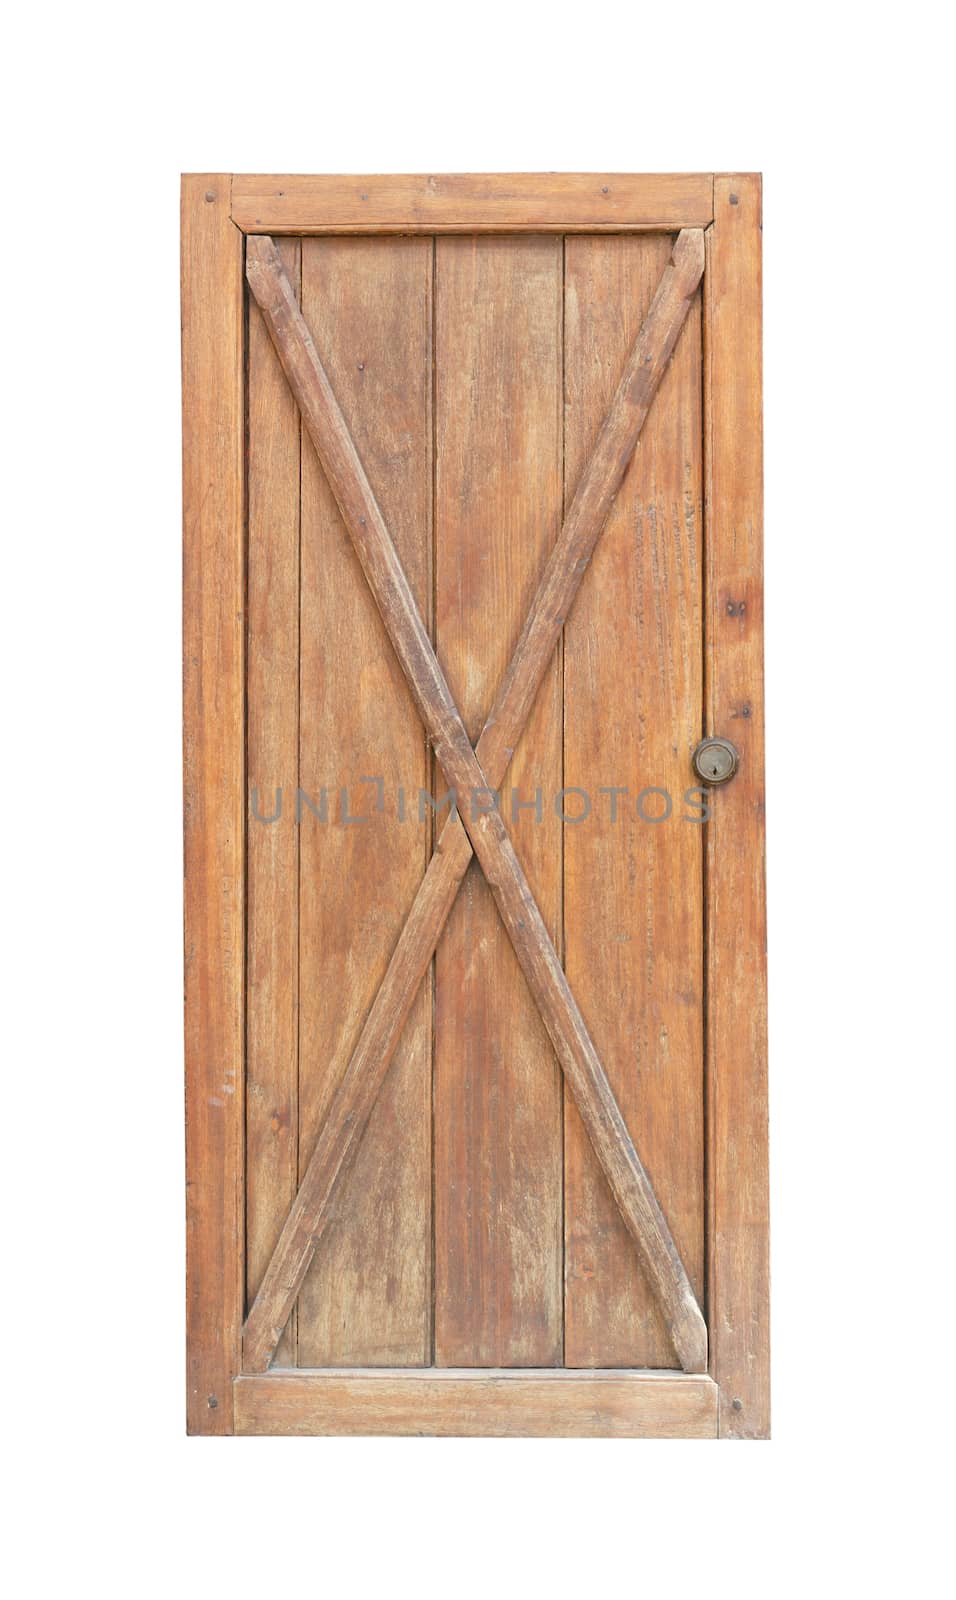 Wooden door isotlated on white background by vitawin